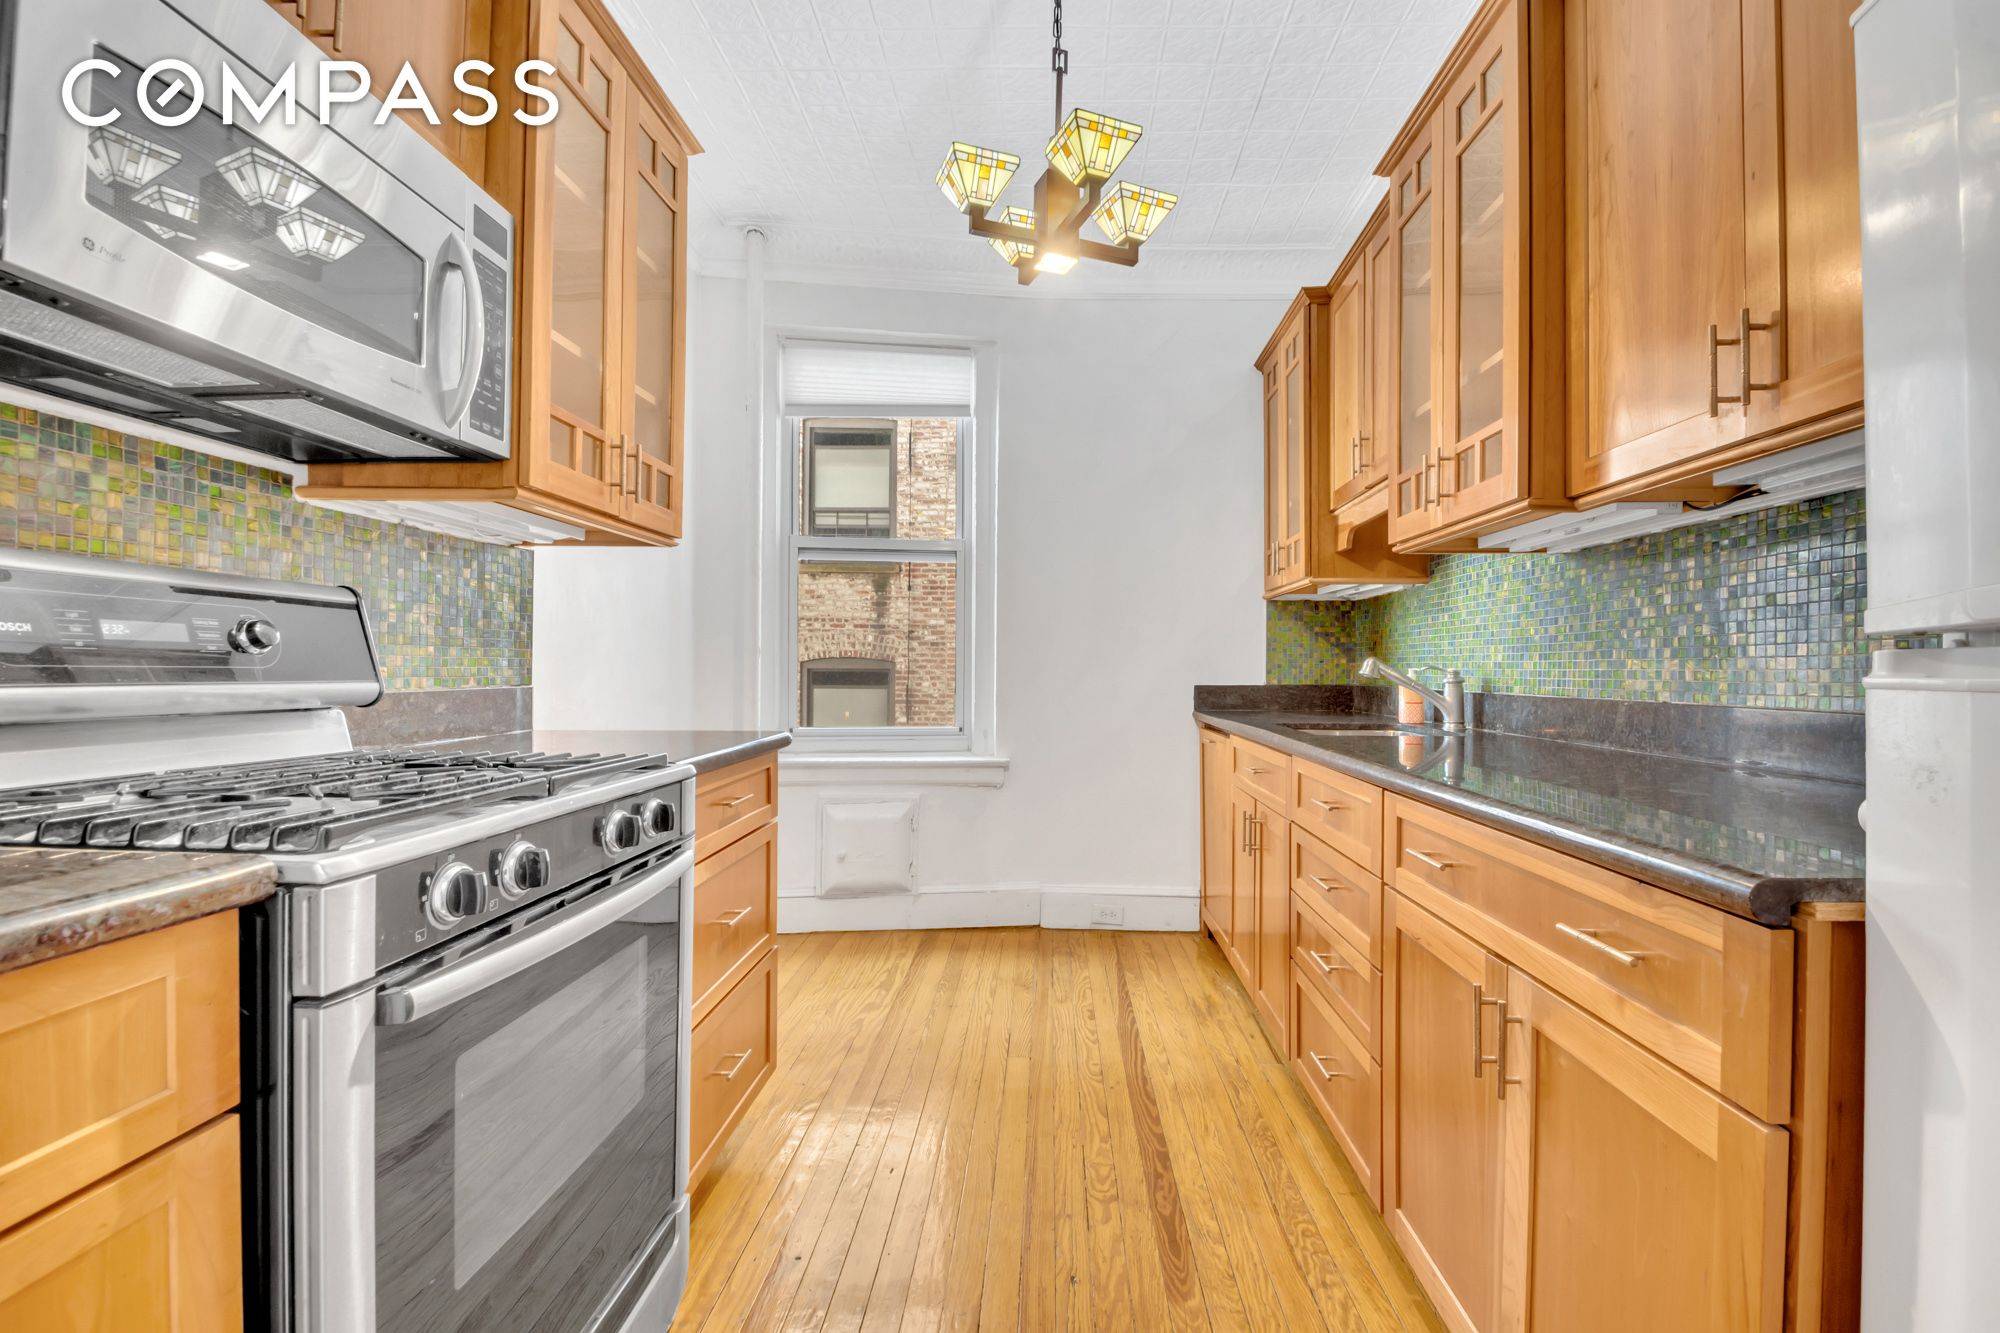 This sweet 1 bedroom, 1 bath Washington Heights home has all the prewar details you could ask for.